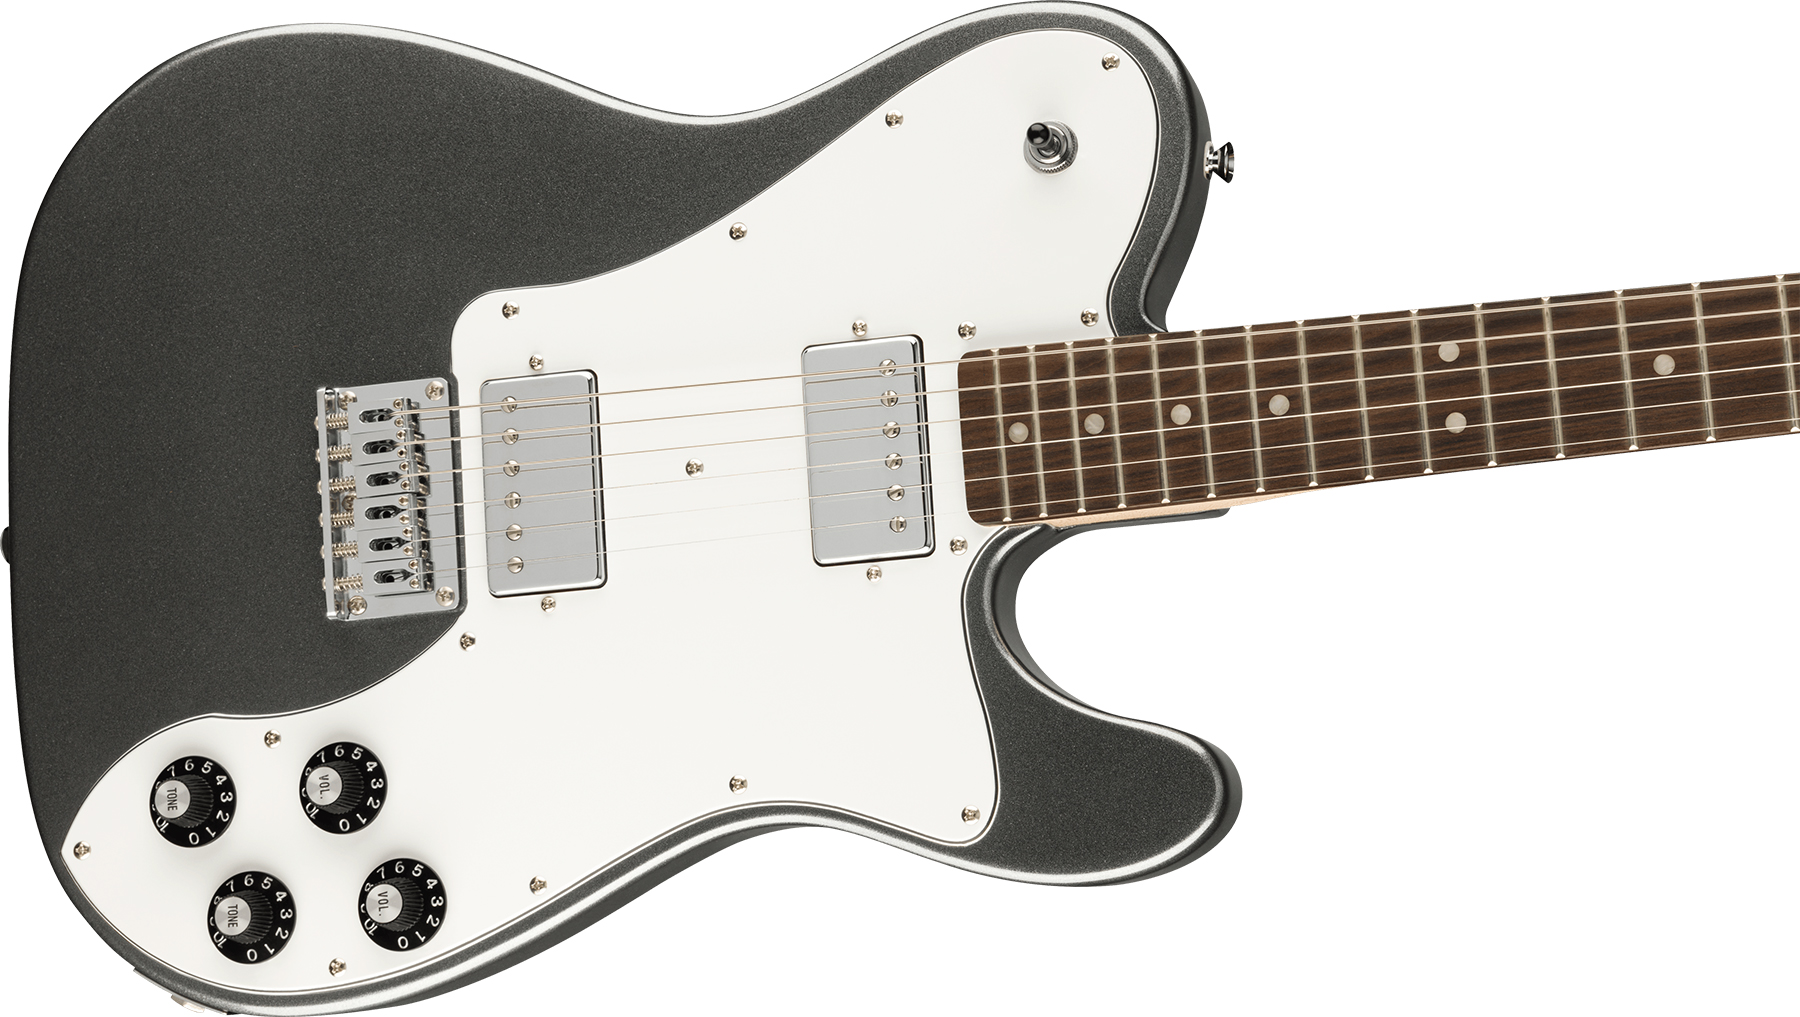 Squier Tele Affinity Deluxe 2021 Hh Ht Lau - Charcoal Frost Metallic - E-Gitarre in Teleform - Variation 2